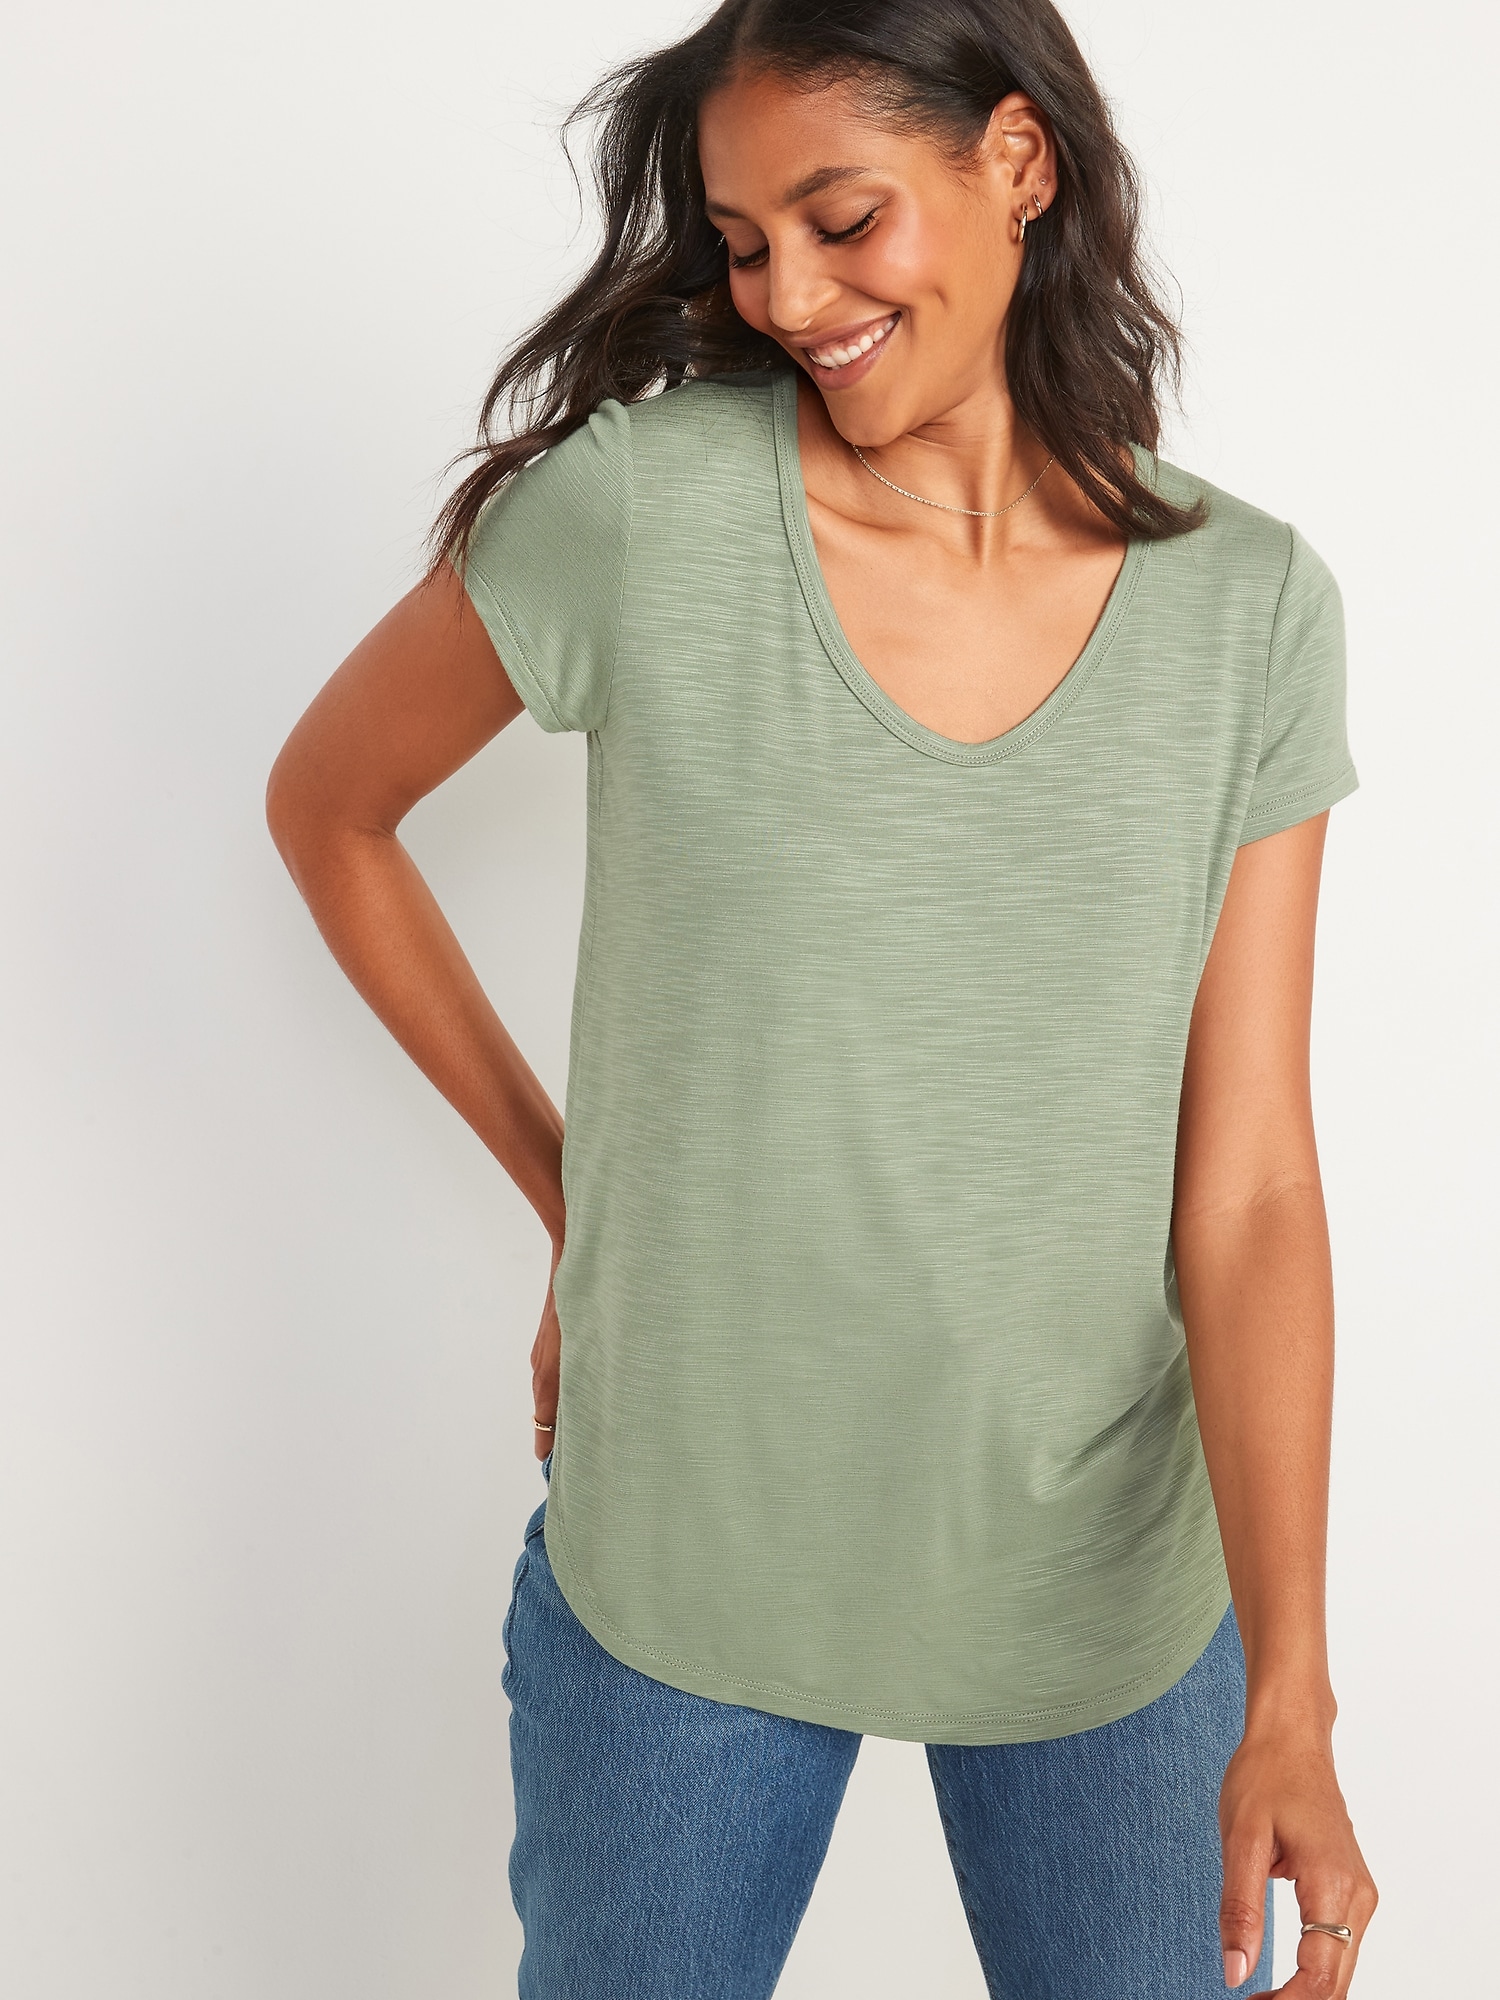 Luxe Slub Knit Voop Neck Tunic T Shirt For Women Old Navy 